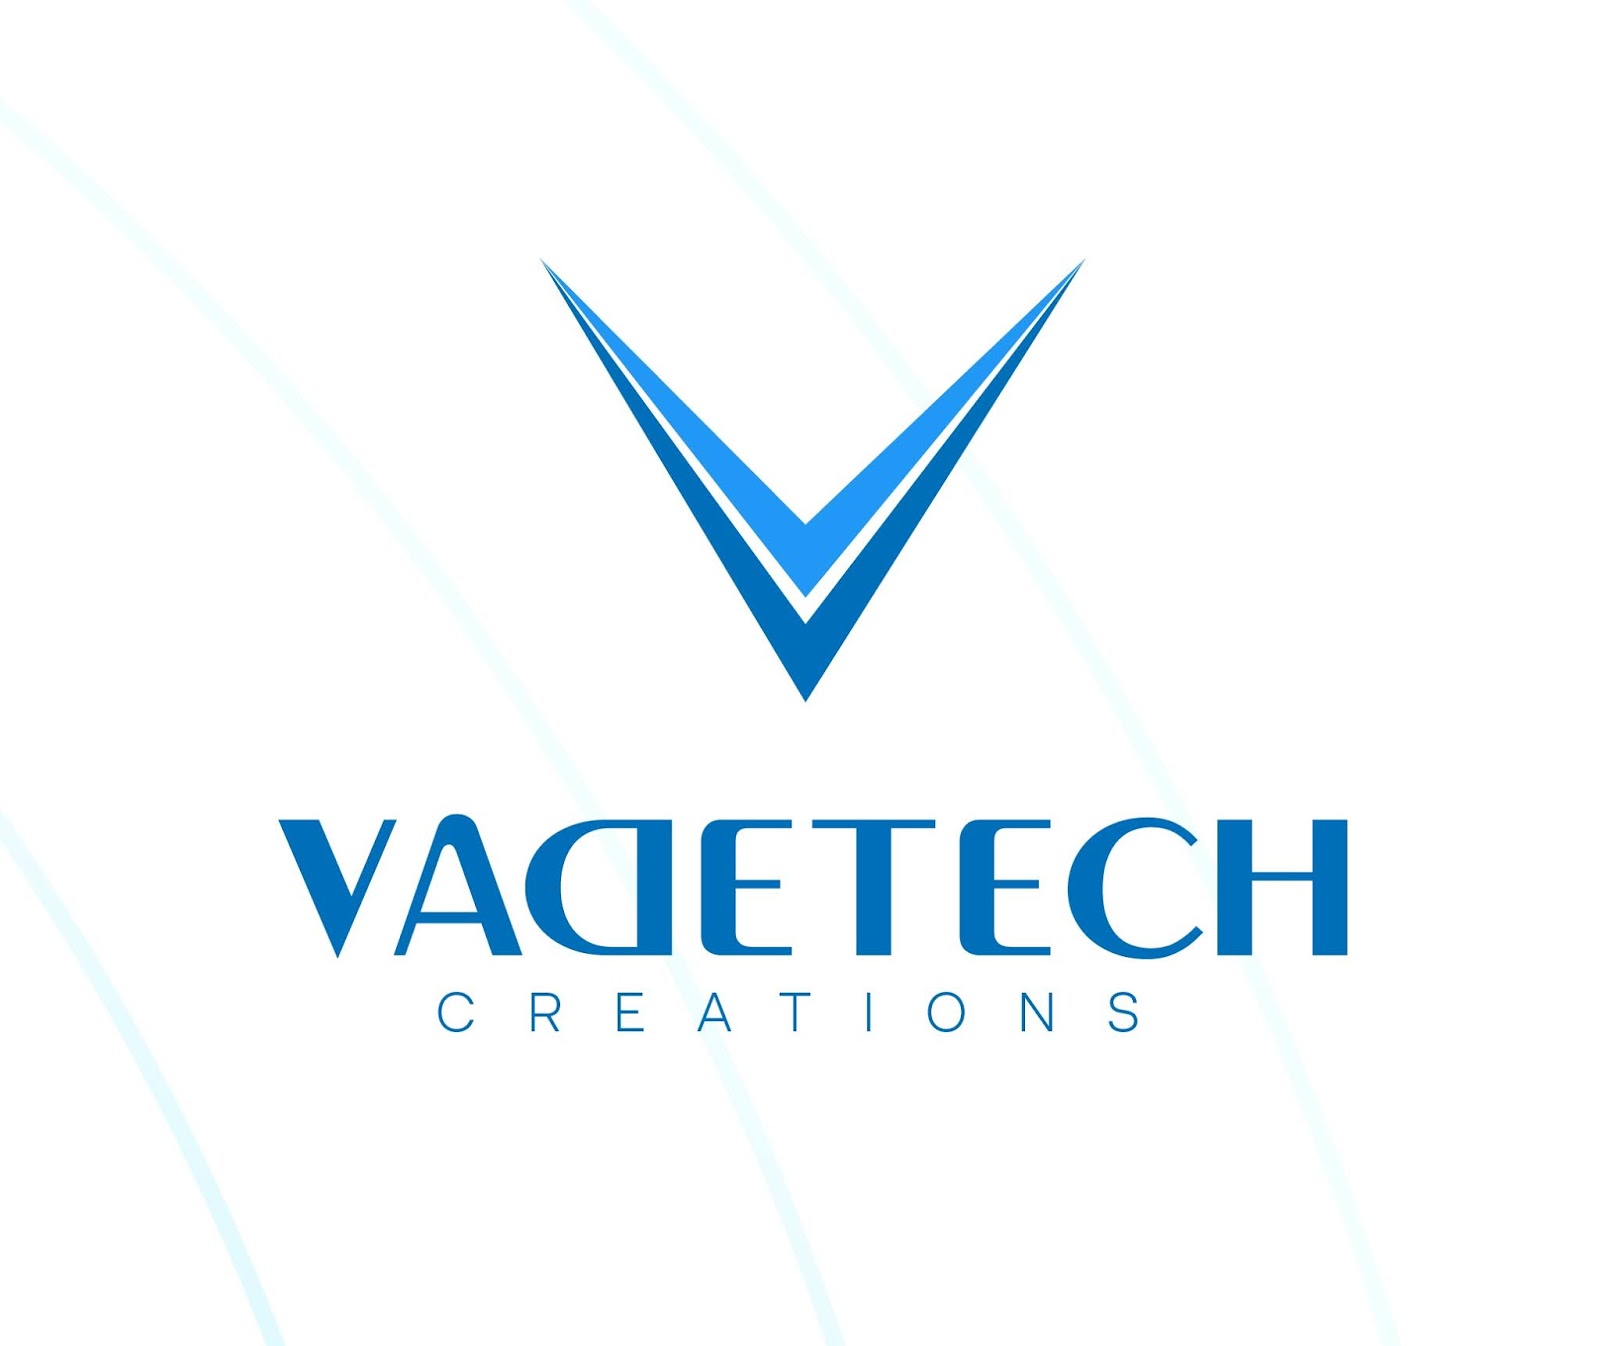 Vadetech Creations